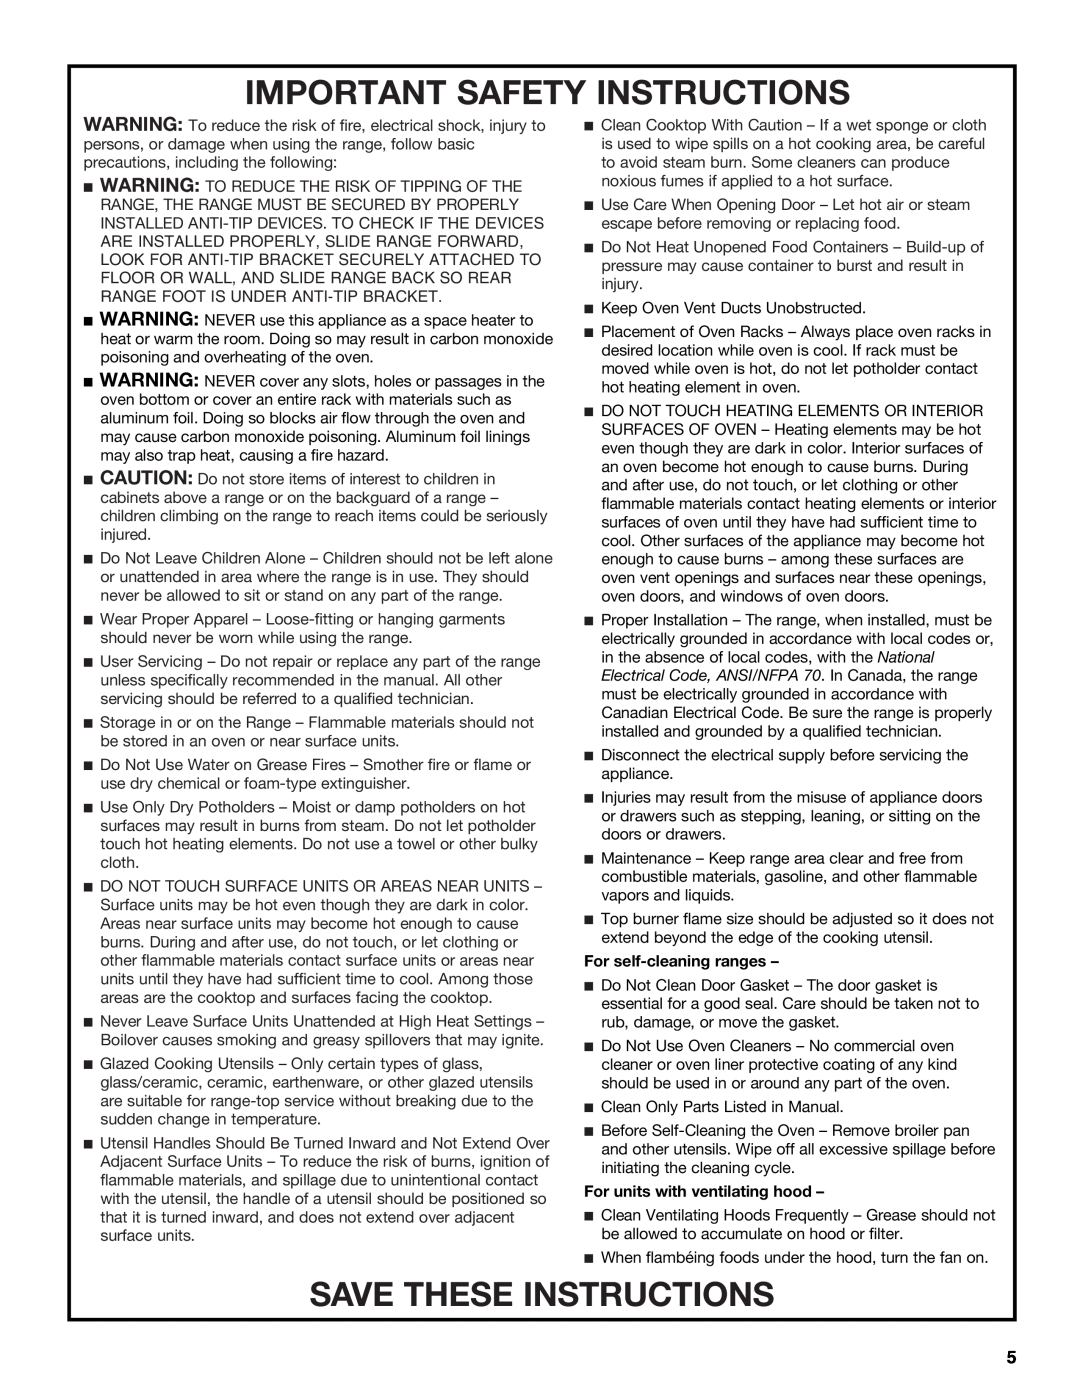 Jenn-Air JD59860 manual Important Safety Instructions, Save These Instructions, For self-cleaning ranges 